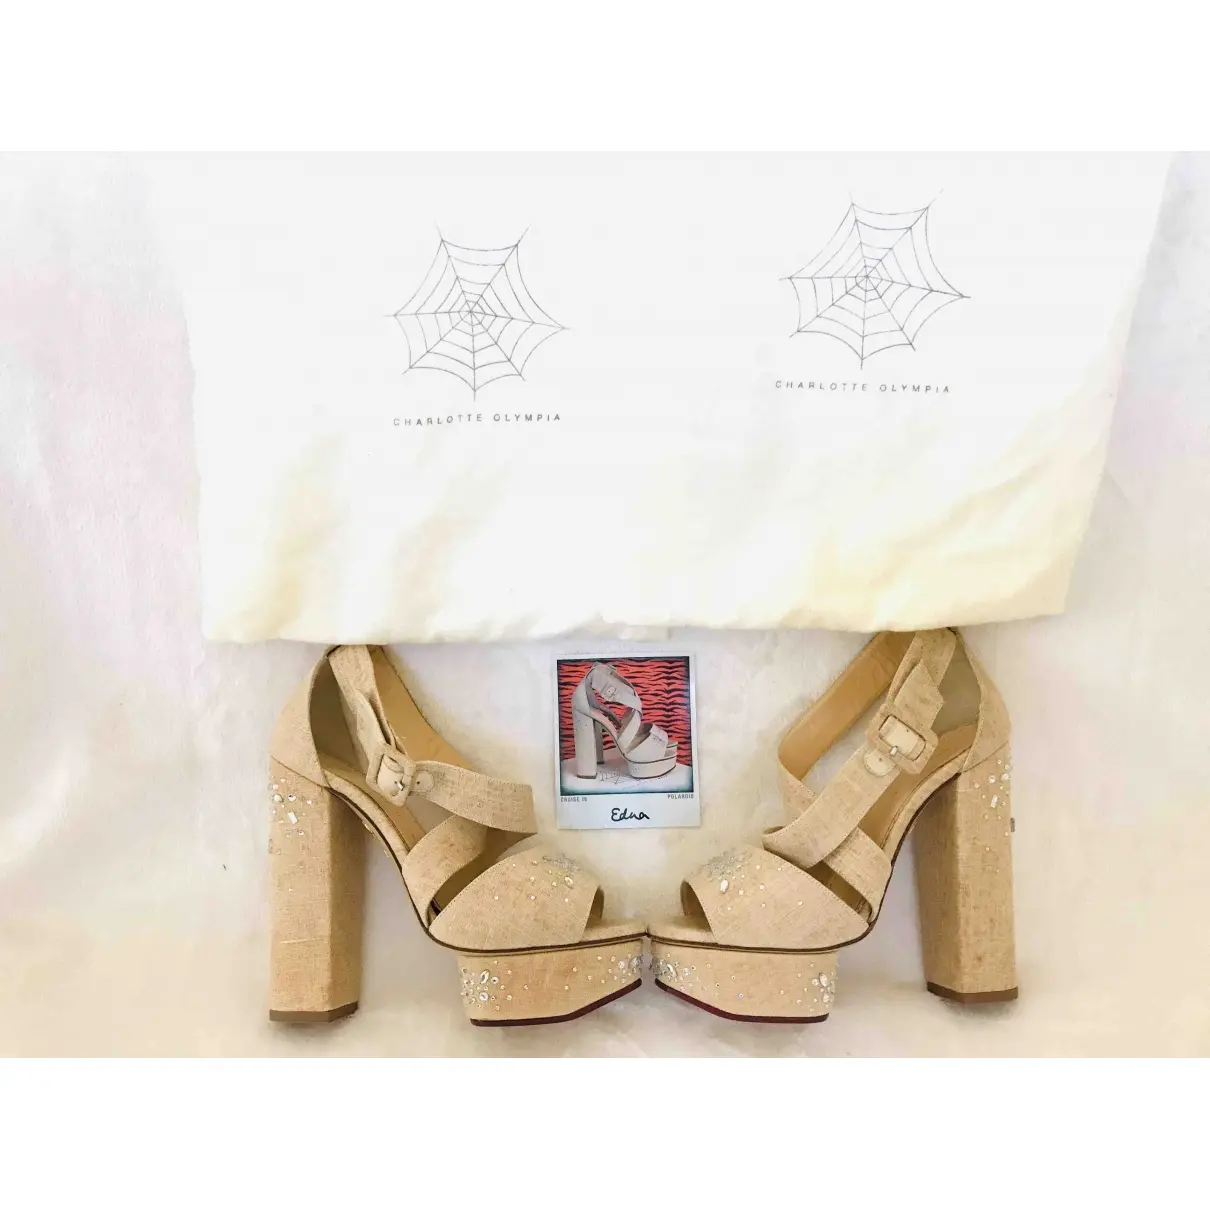 Cloth sandals Charlotte Olympia